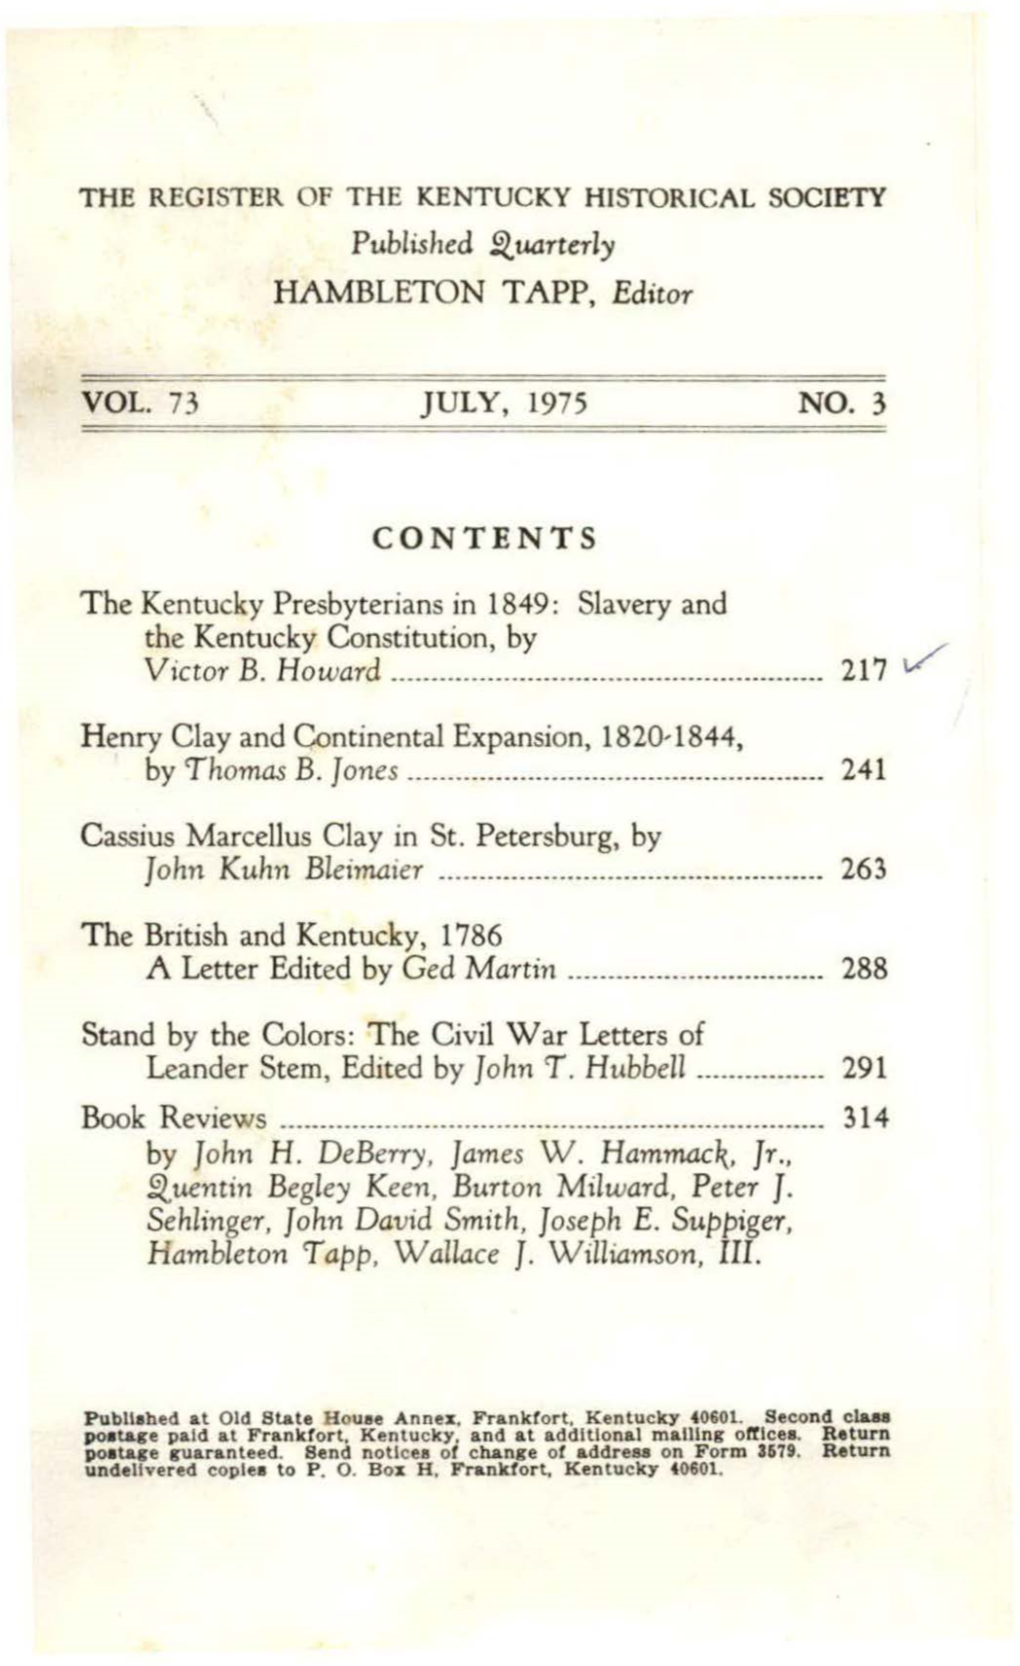 The Kentucky Presbyterians in 1849: Slavery and the Kentucky Constitution